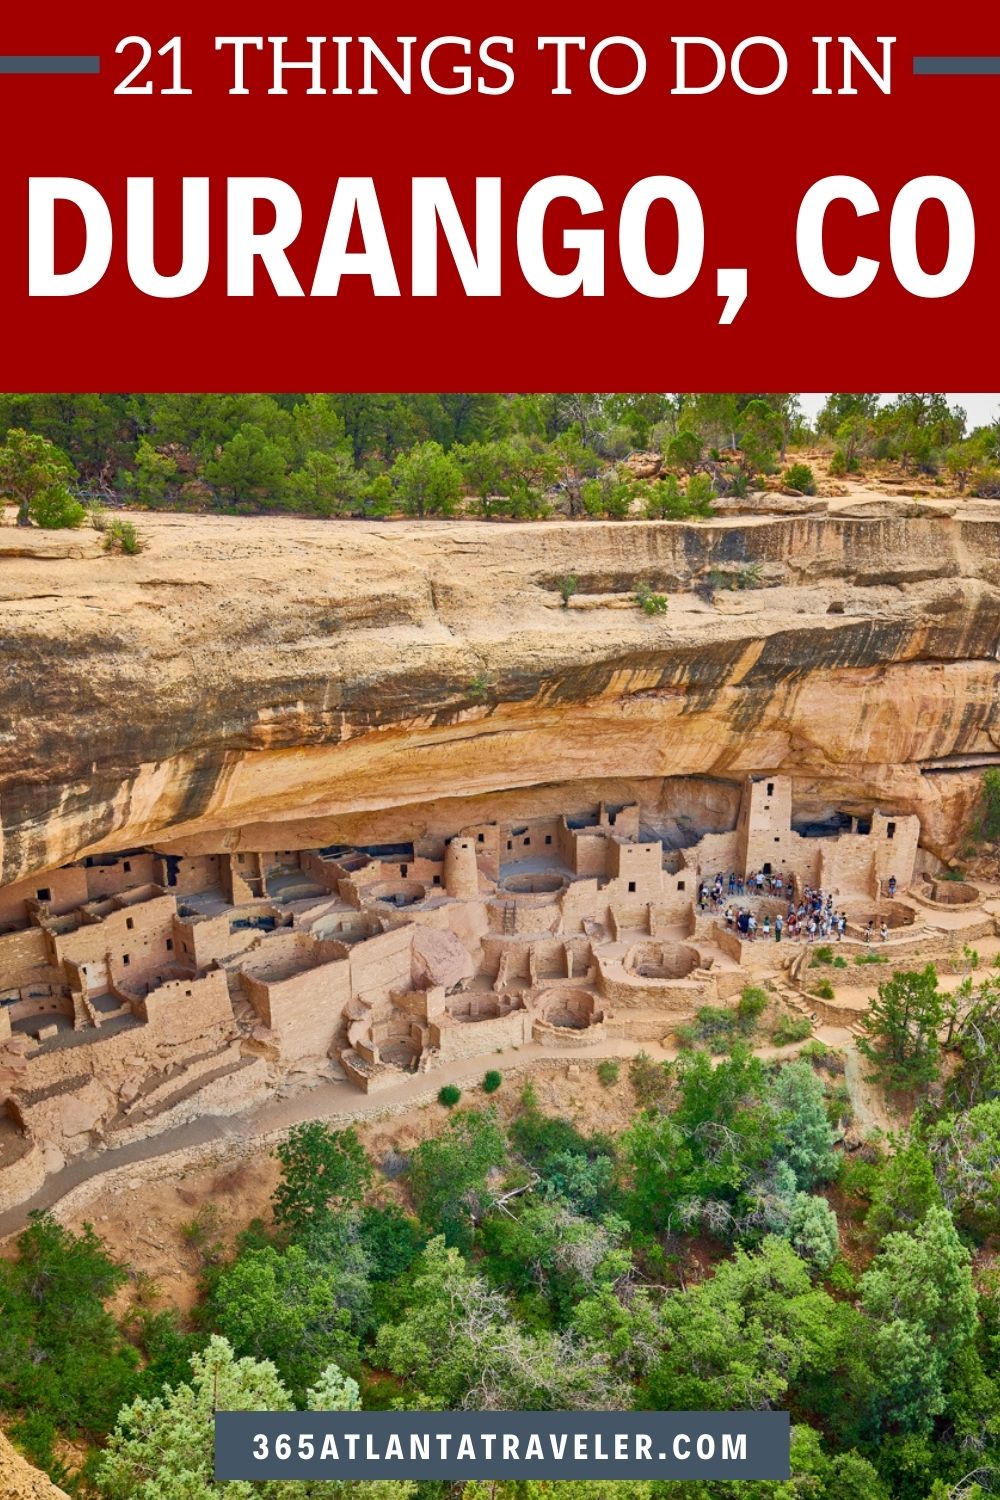 21 AMAZING THINGS TO DO IN DURANGO CO YOU'LL LOVE